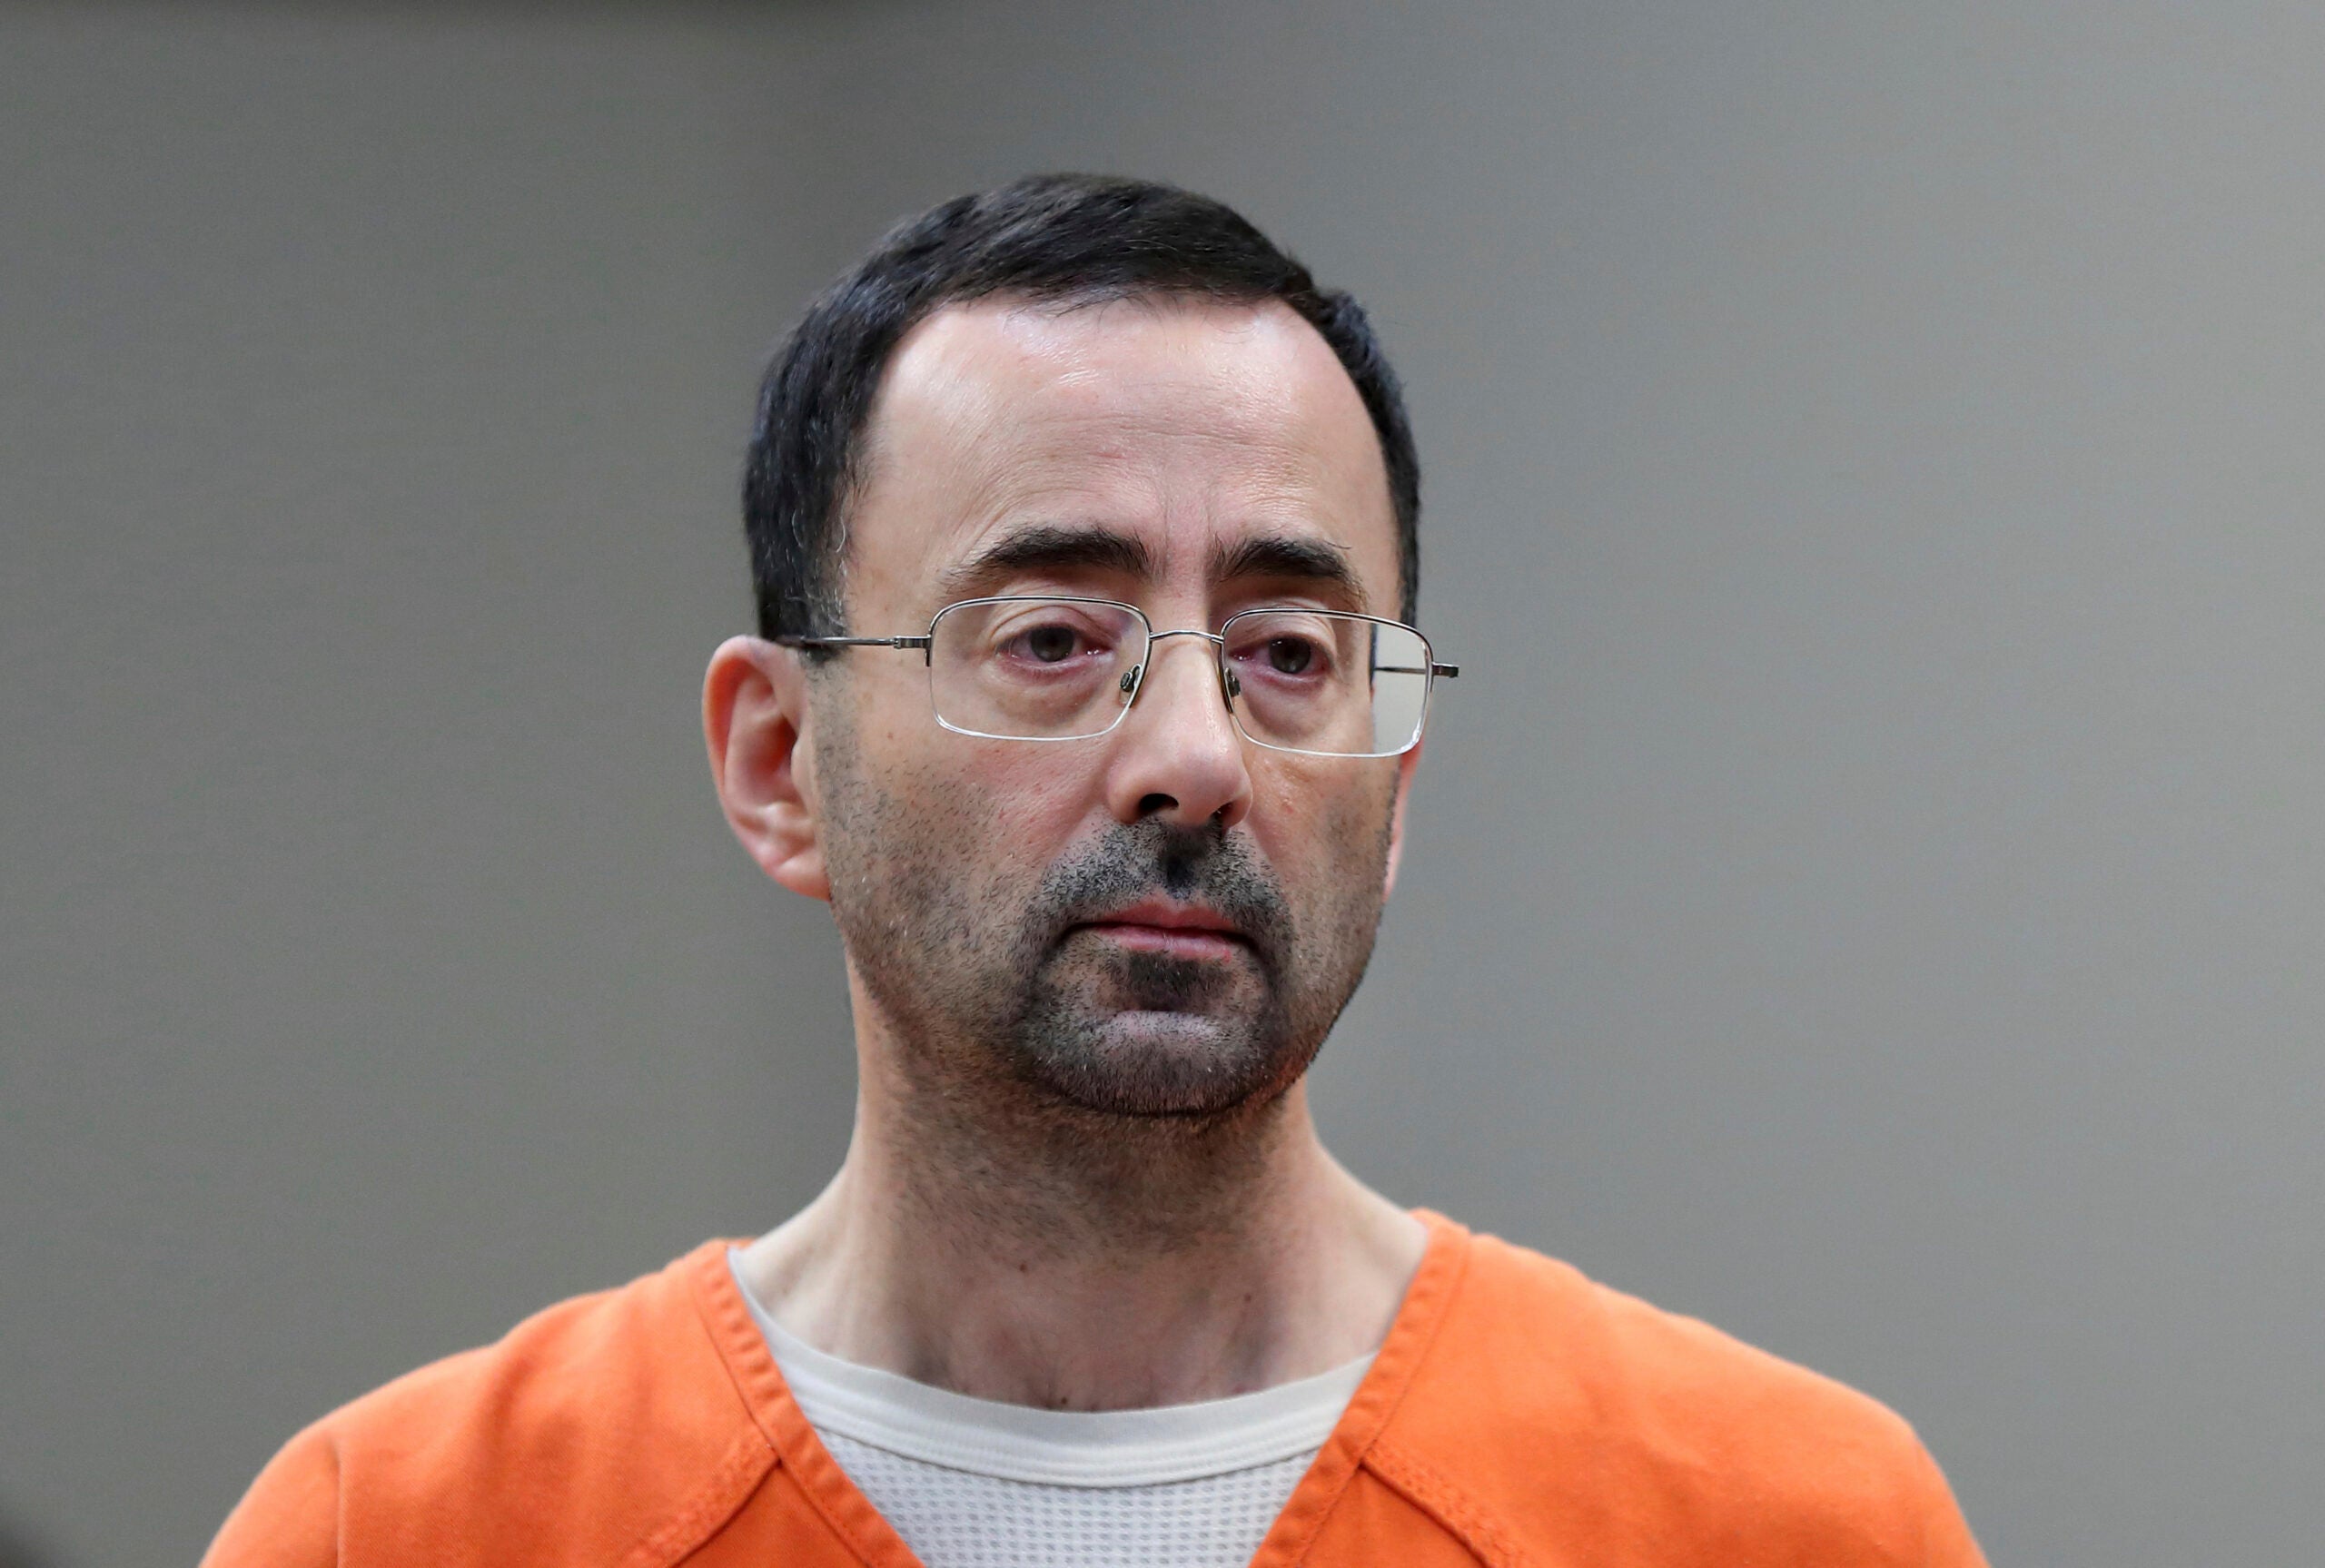 Disgraced former sports doctor Larry Nassar appears in court for a plea hearing.